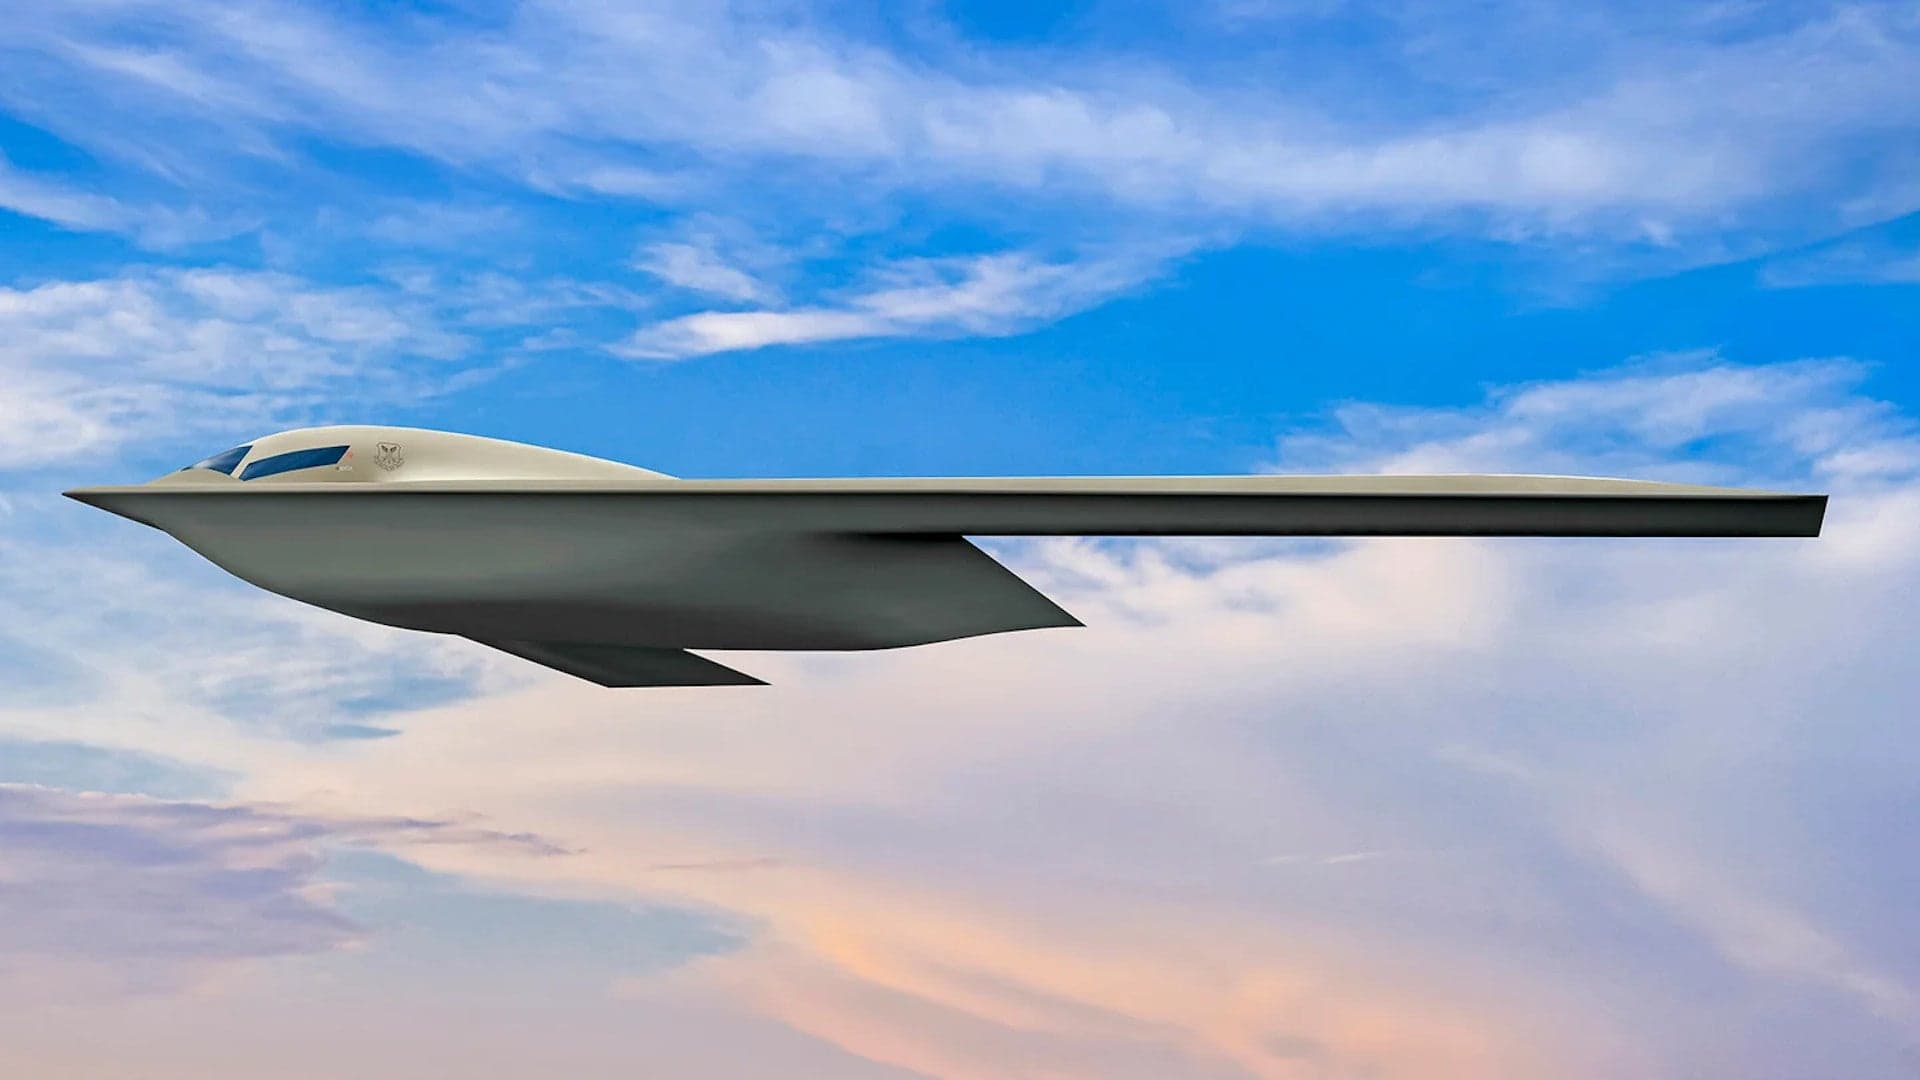 A Sixth B-21 Raider Stealth Bomber Is Now Being Built